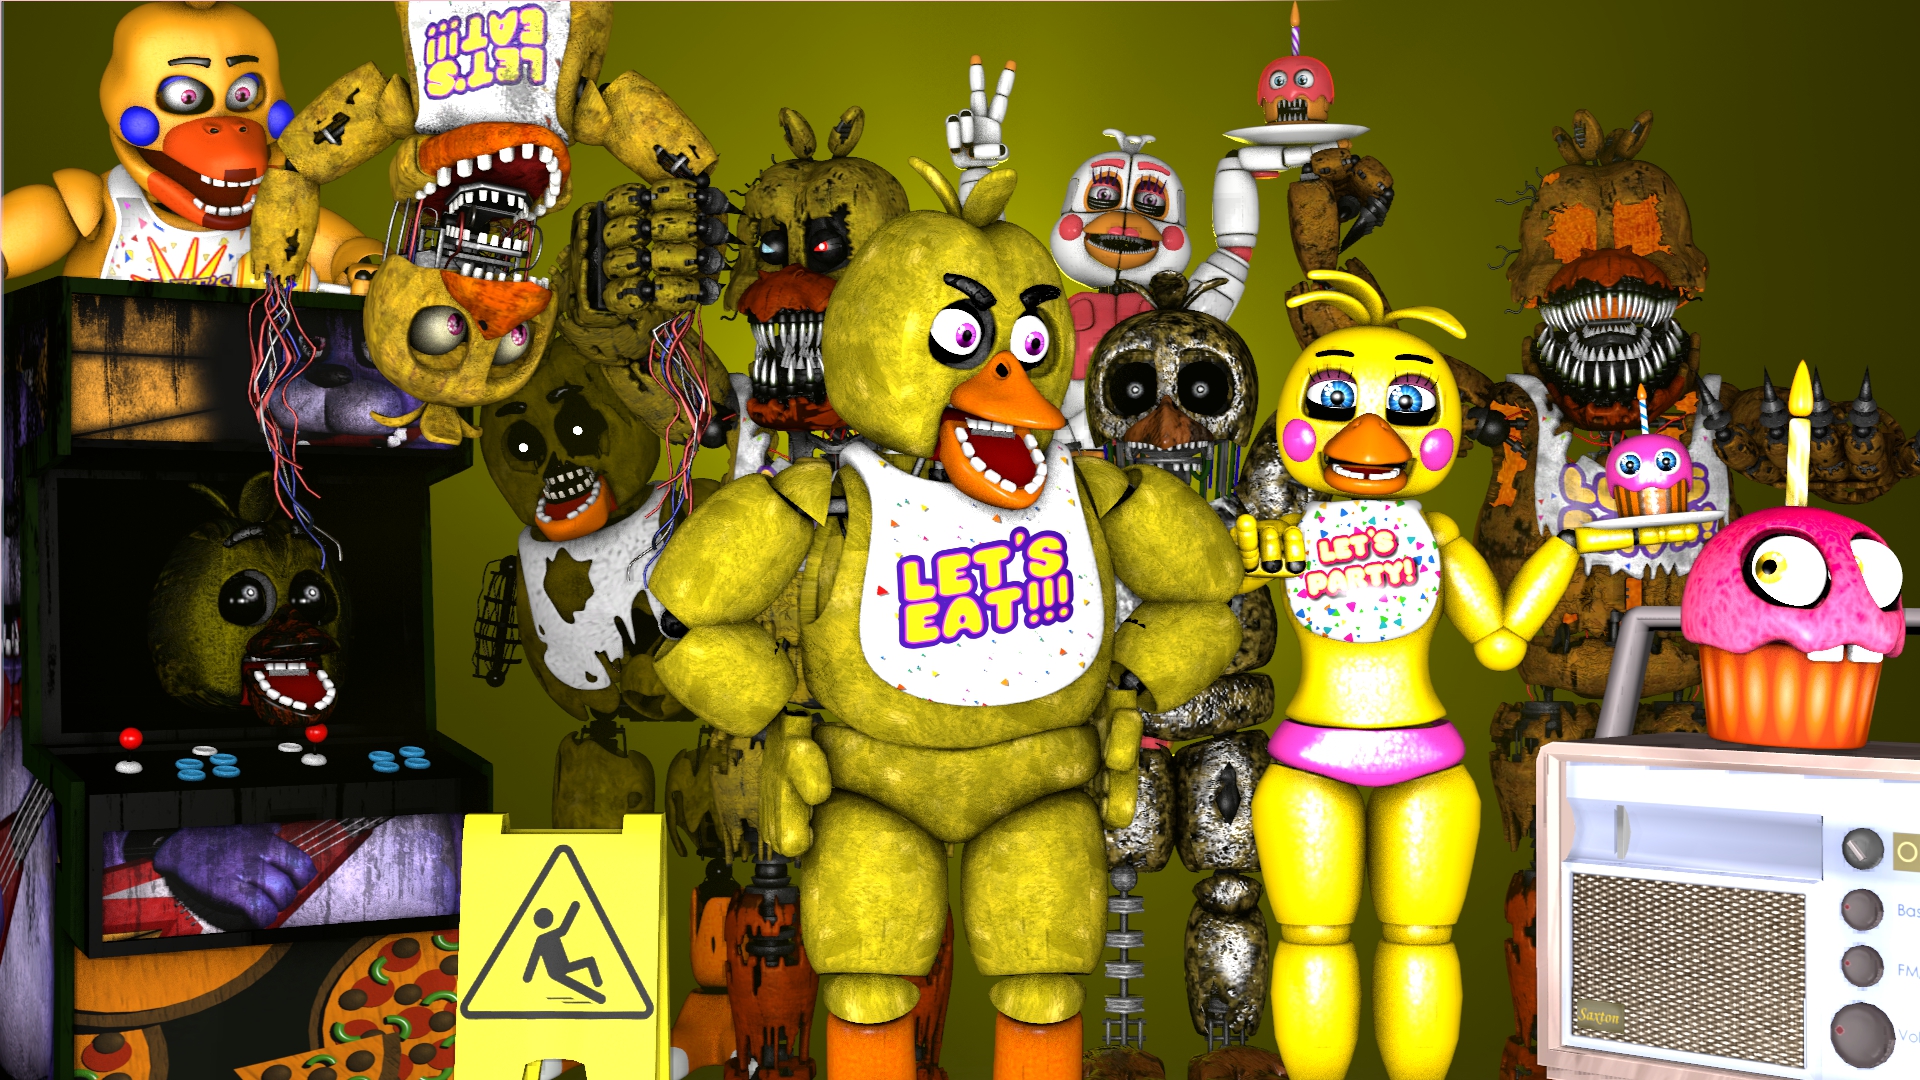 UCN Withered Chica Mugshot by NOTAGK33 on DeviantArt